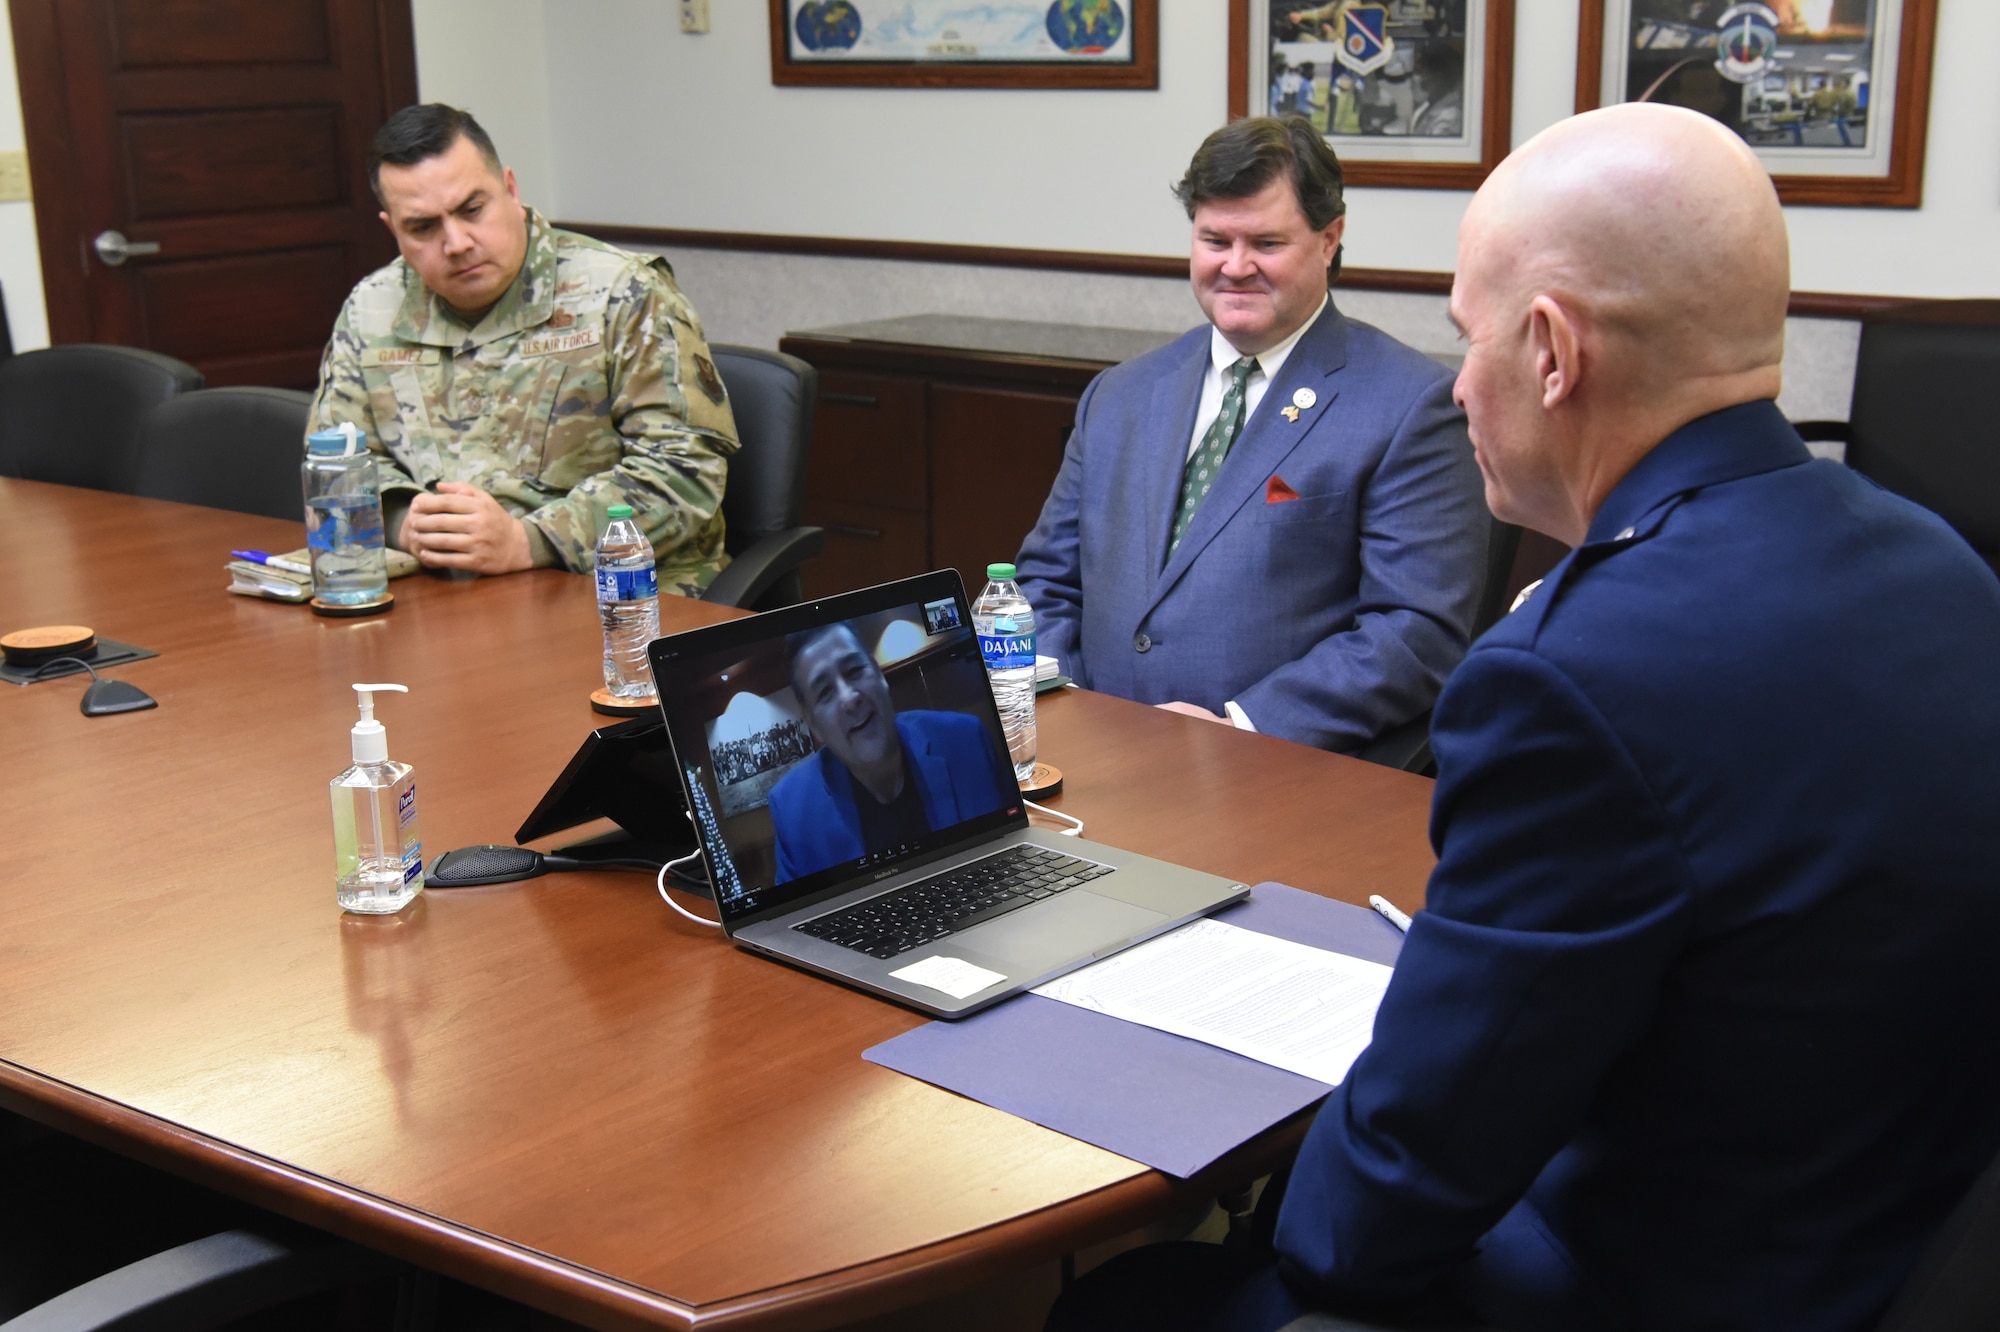 Maj. Gen. Michael Lutton, 20th Air Force commander, right, watches as Mark Fox, chairman of the Mandan, Hidatsa and Arikara Nation, on the computer screen, gives remarks during the Sentinel Programmatic Agreement Signing Ceremony.